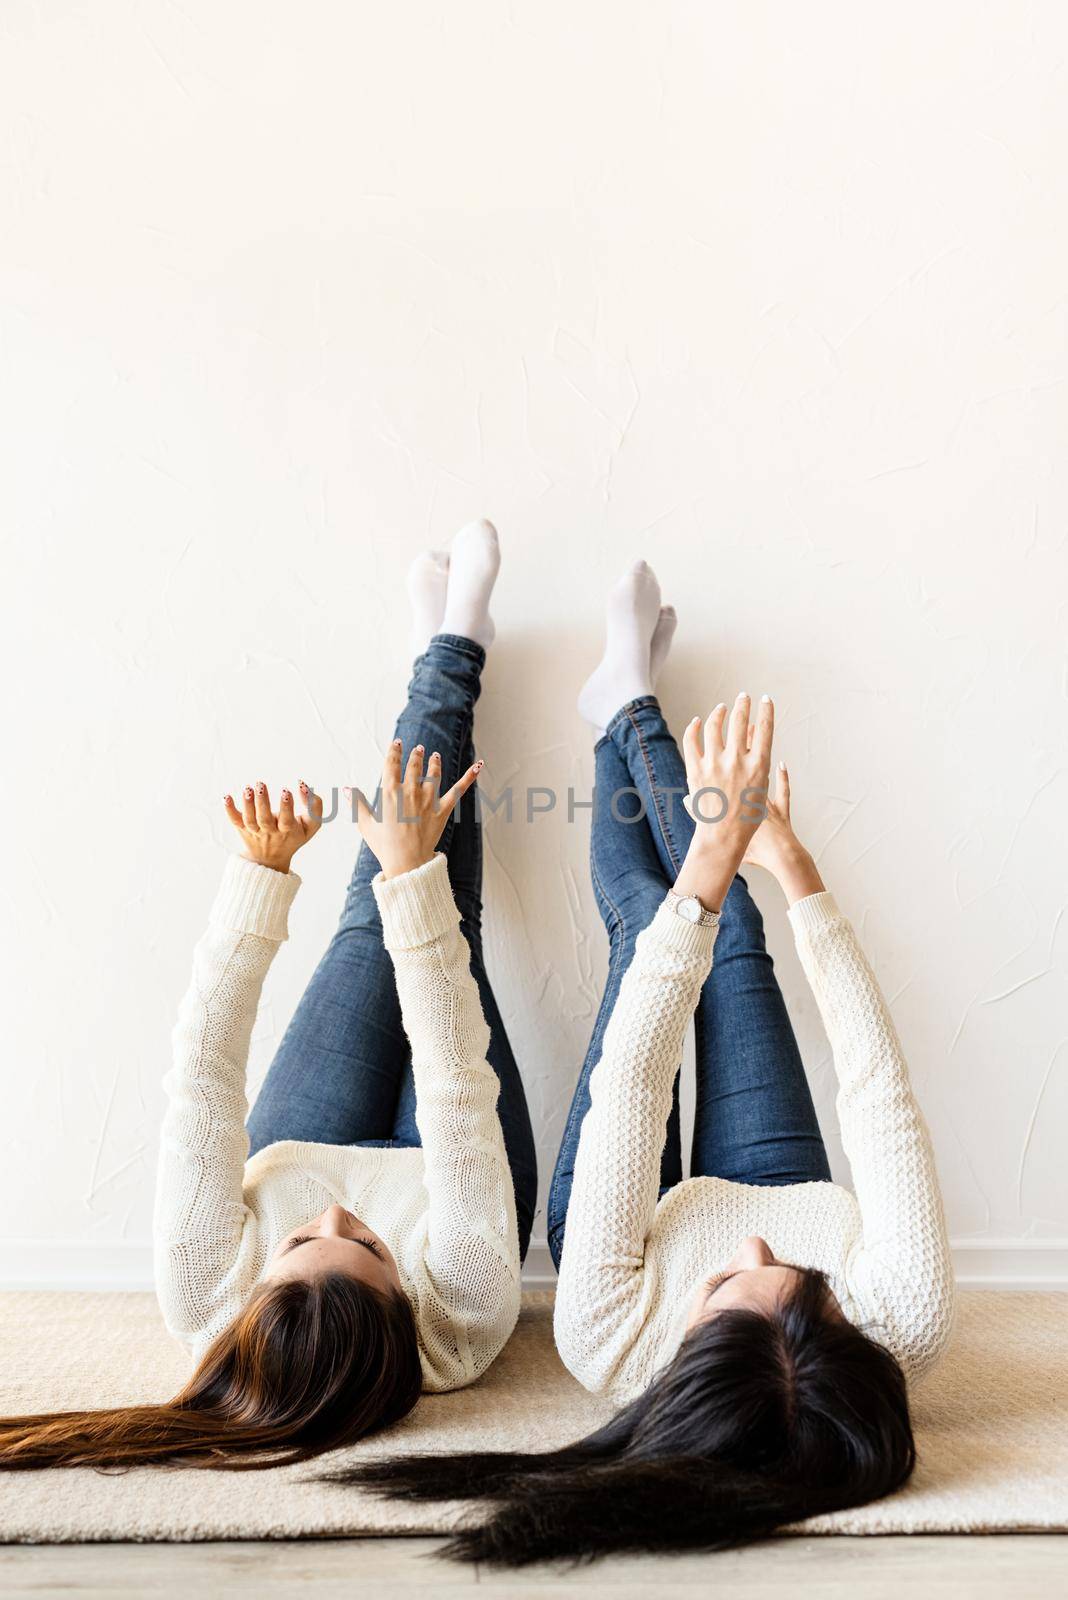 Two women laying at the rug legs up having fun by Desperada